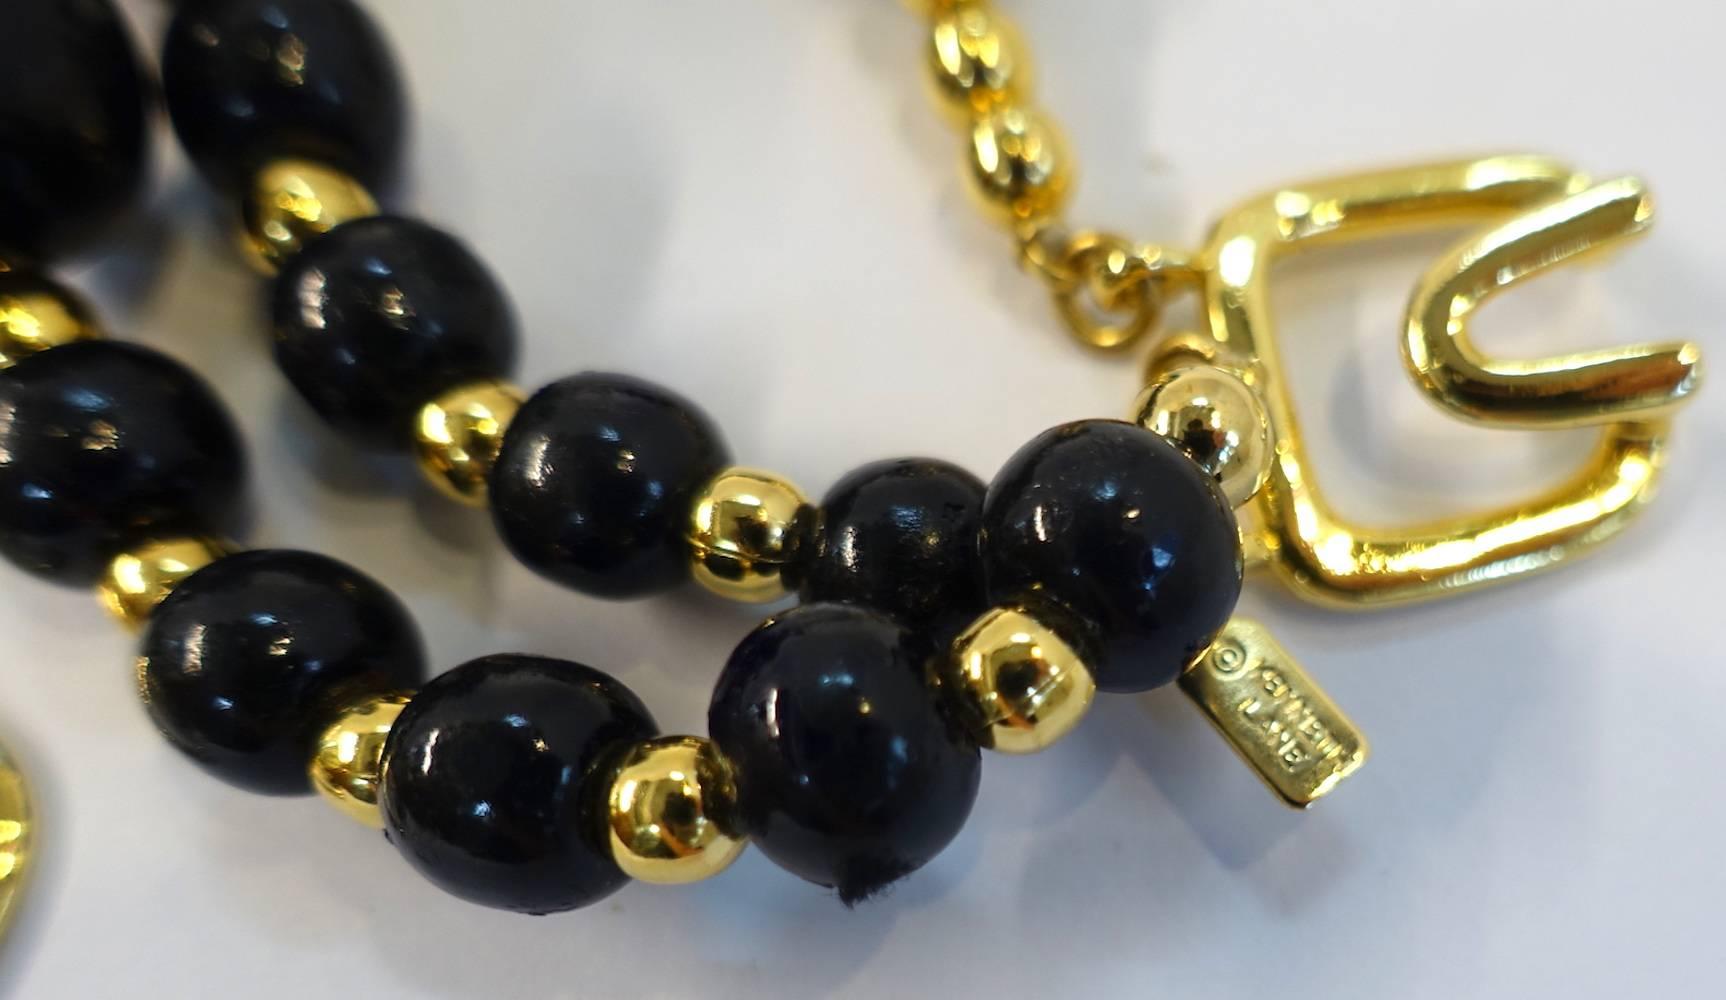 This signed Kenneth Lane necklace features black beads with twisted black twine around each bead.  In excellent condition, this necklace measures 16” and the center falls 4-1/2”.  It has a hook closure and is signed “Kenneth Lane”.  It is in